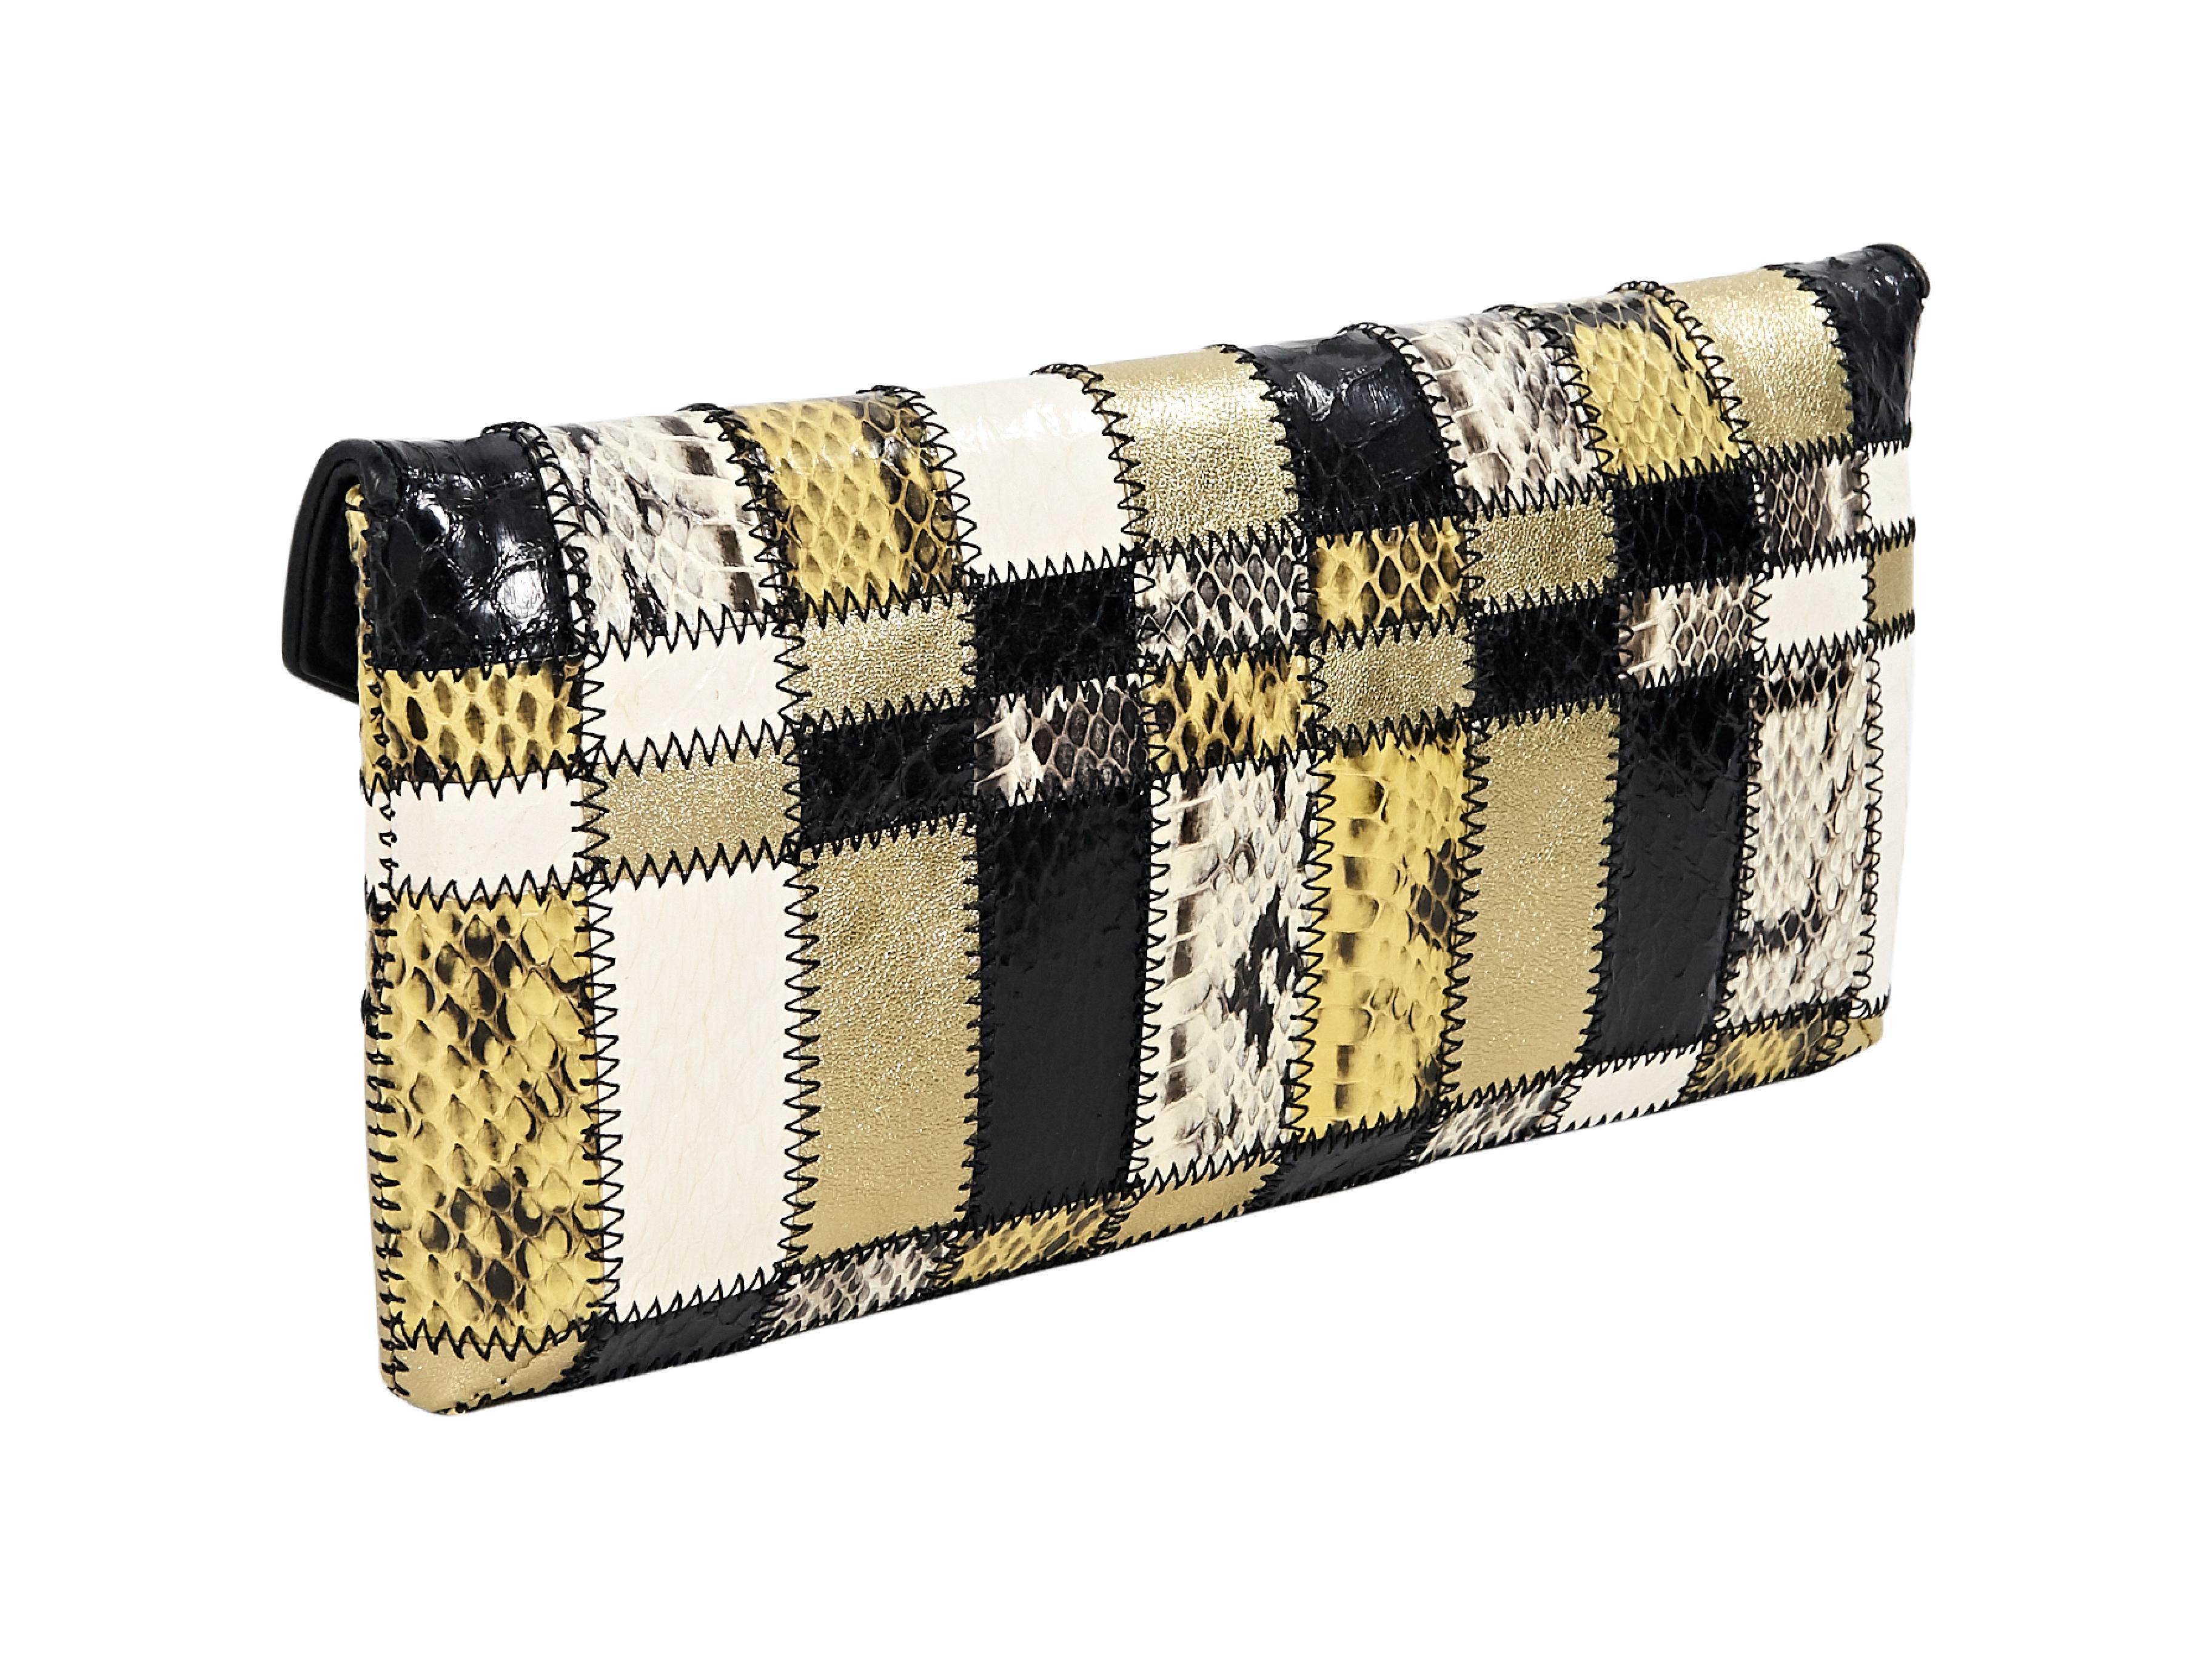 Product details: Multicolor patchwork snakeskin clutch by Tamara Mellon.  Front flap with clasp closure.  Lined interior with inner zip pocket. Goldtone hardware.  10.5